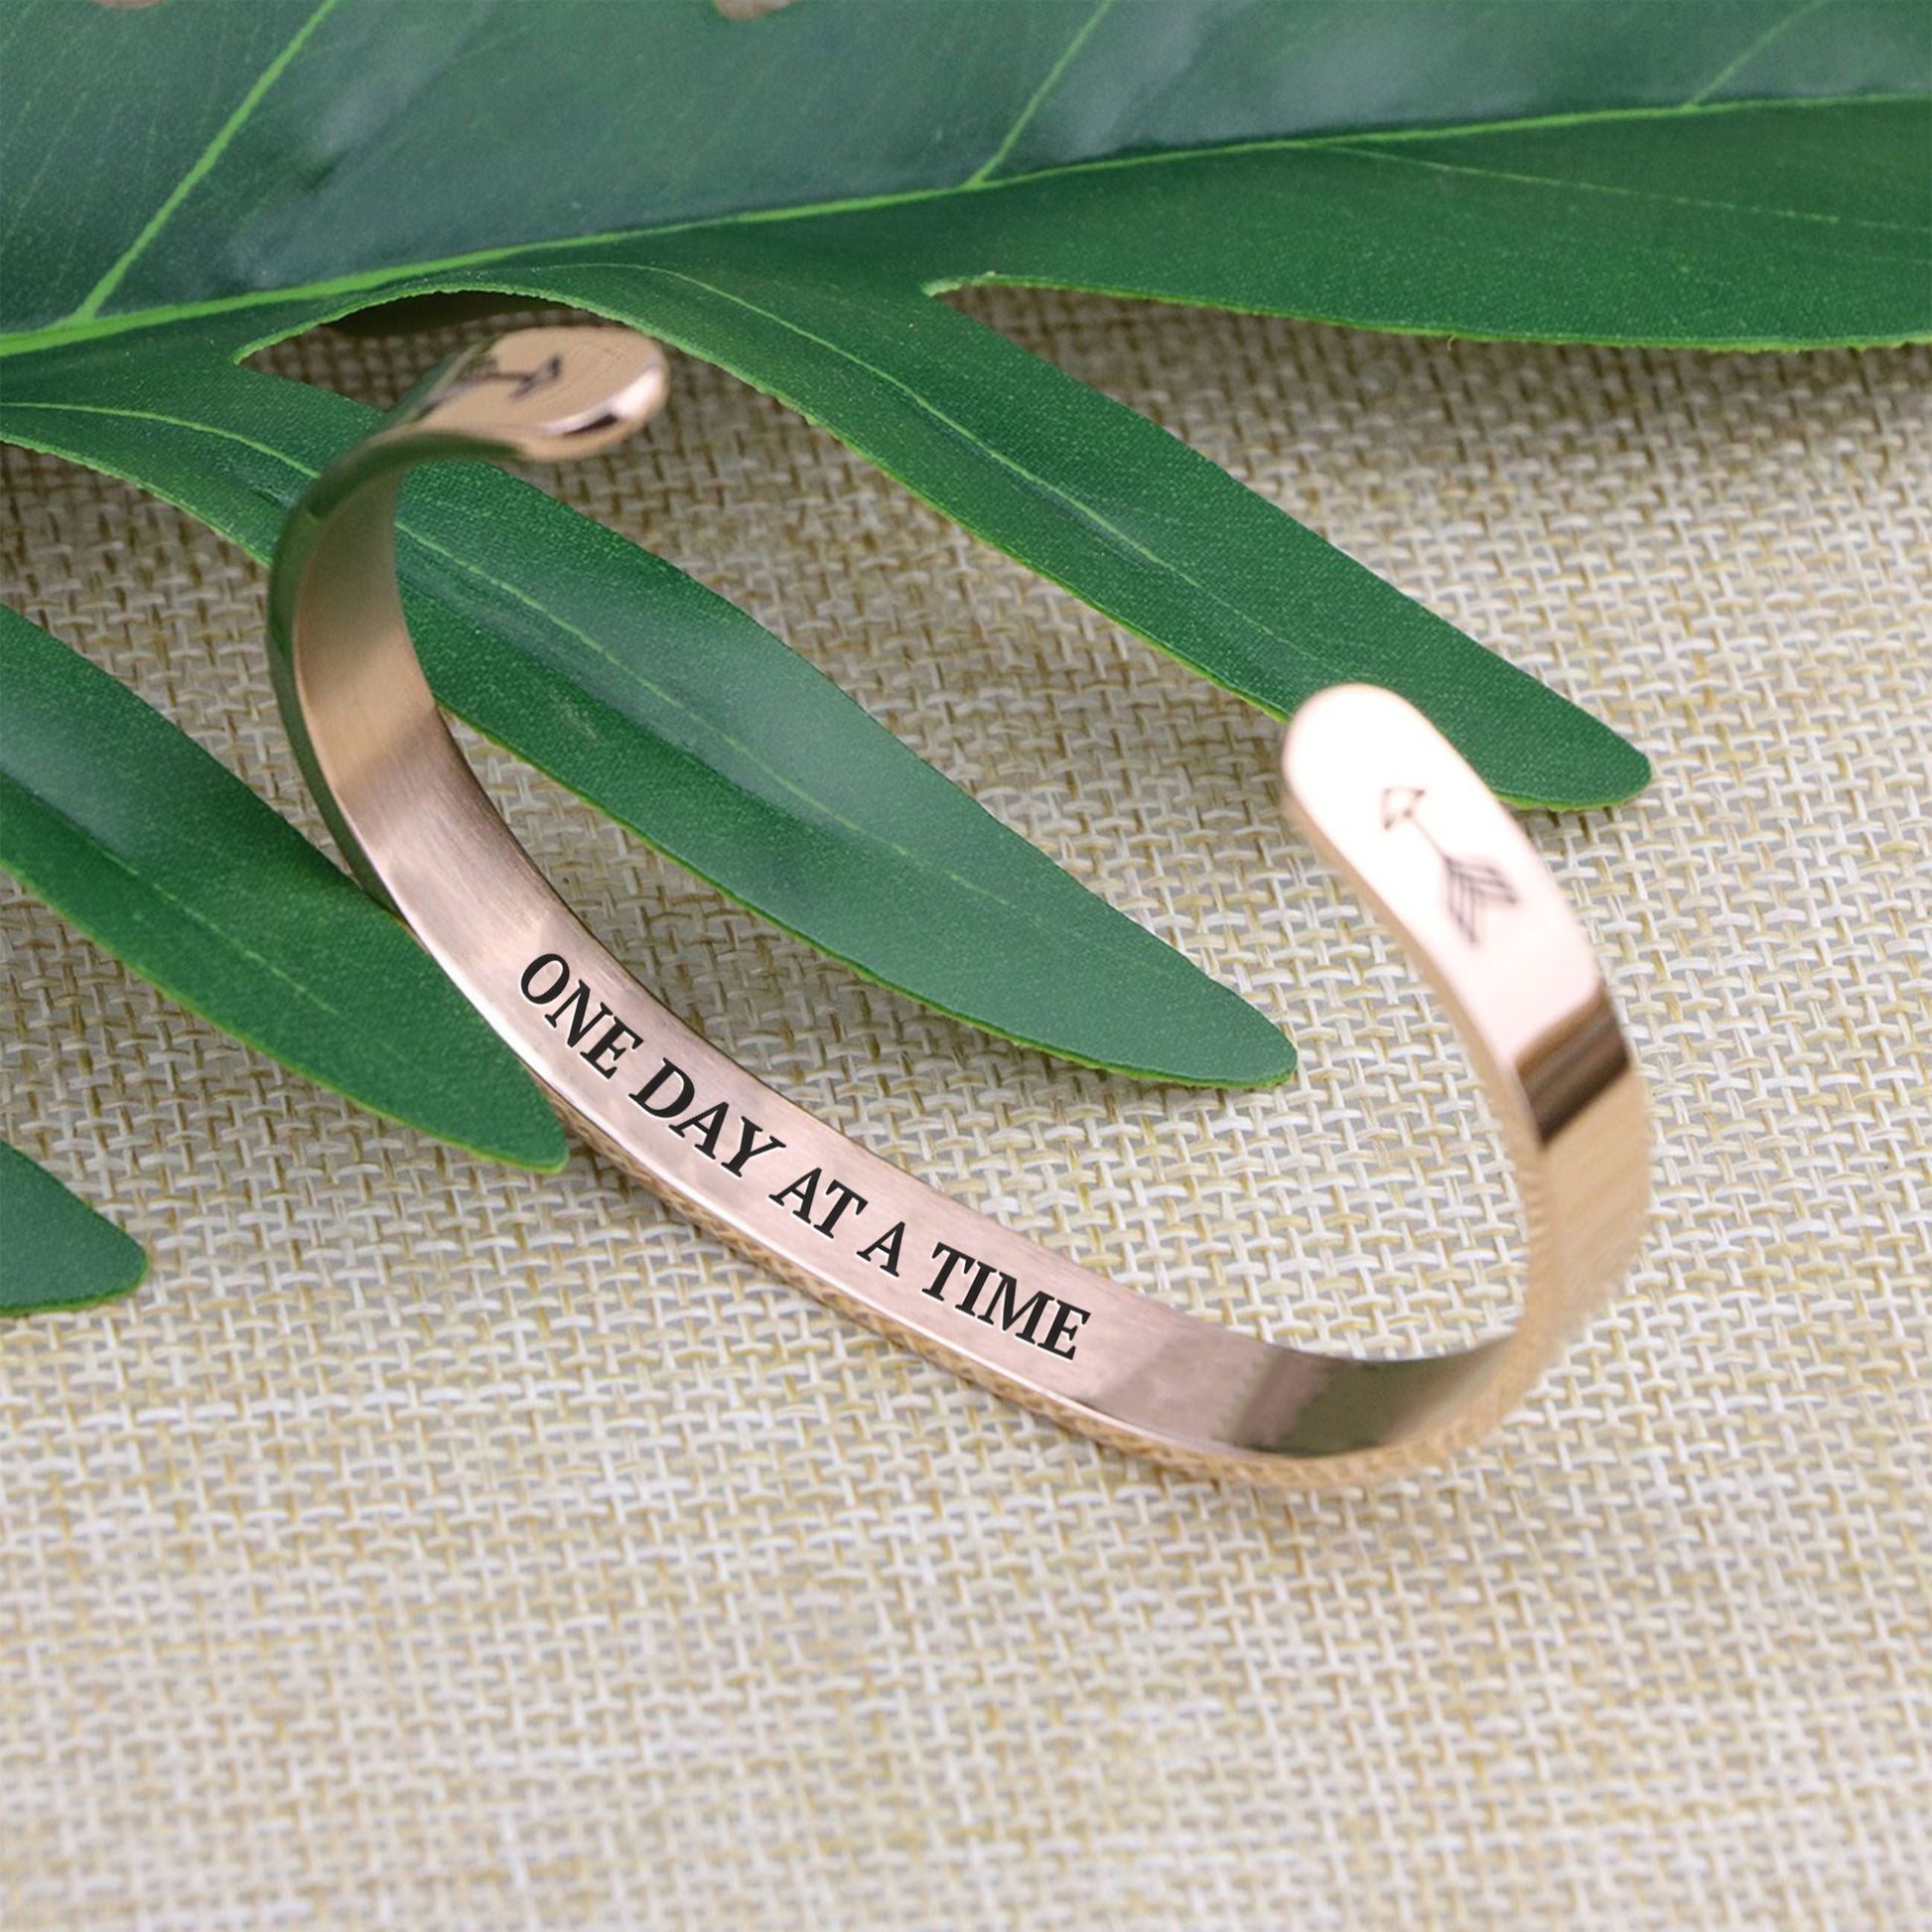 One day at a time bracelet with rose gold plating standing on a burlap surface with a leafy background